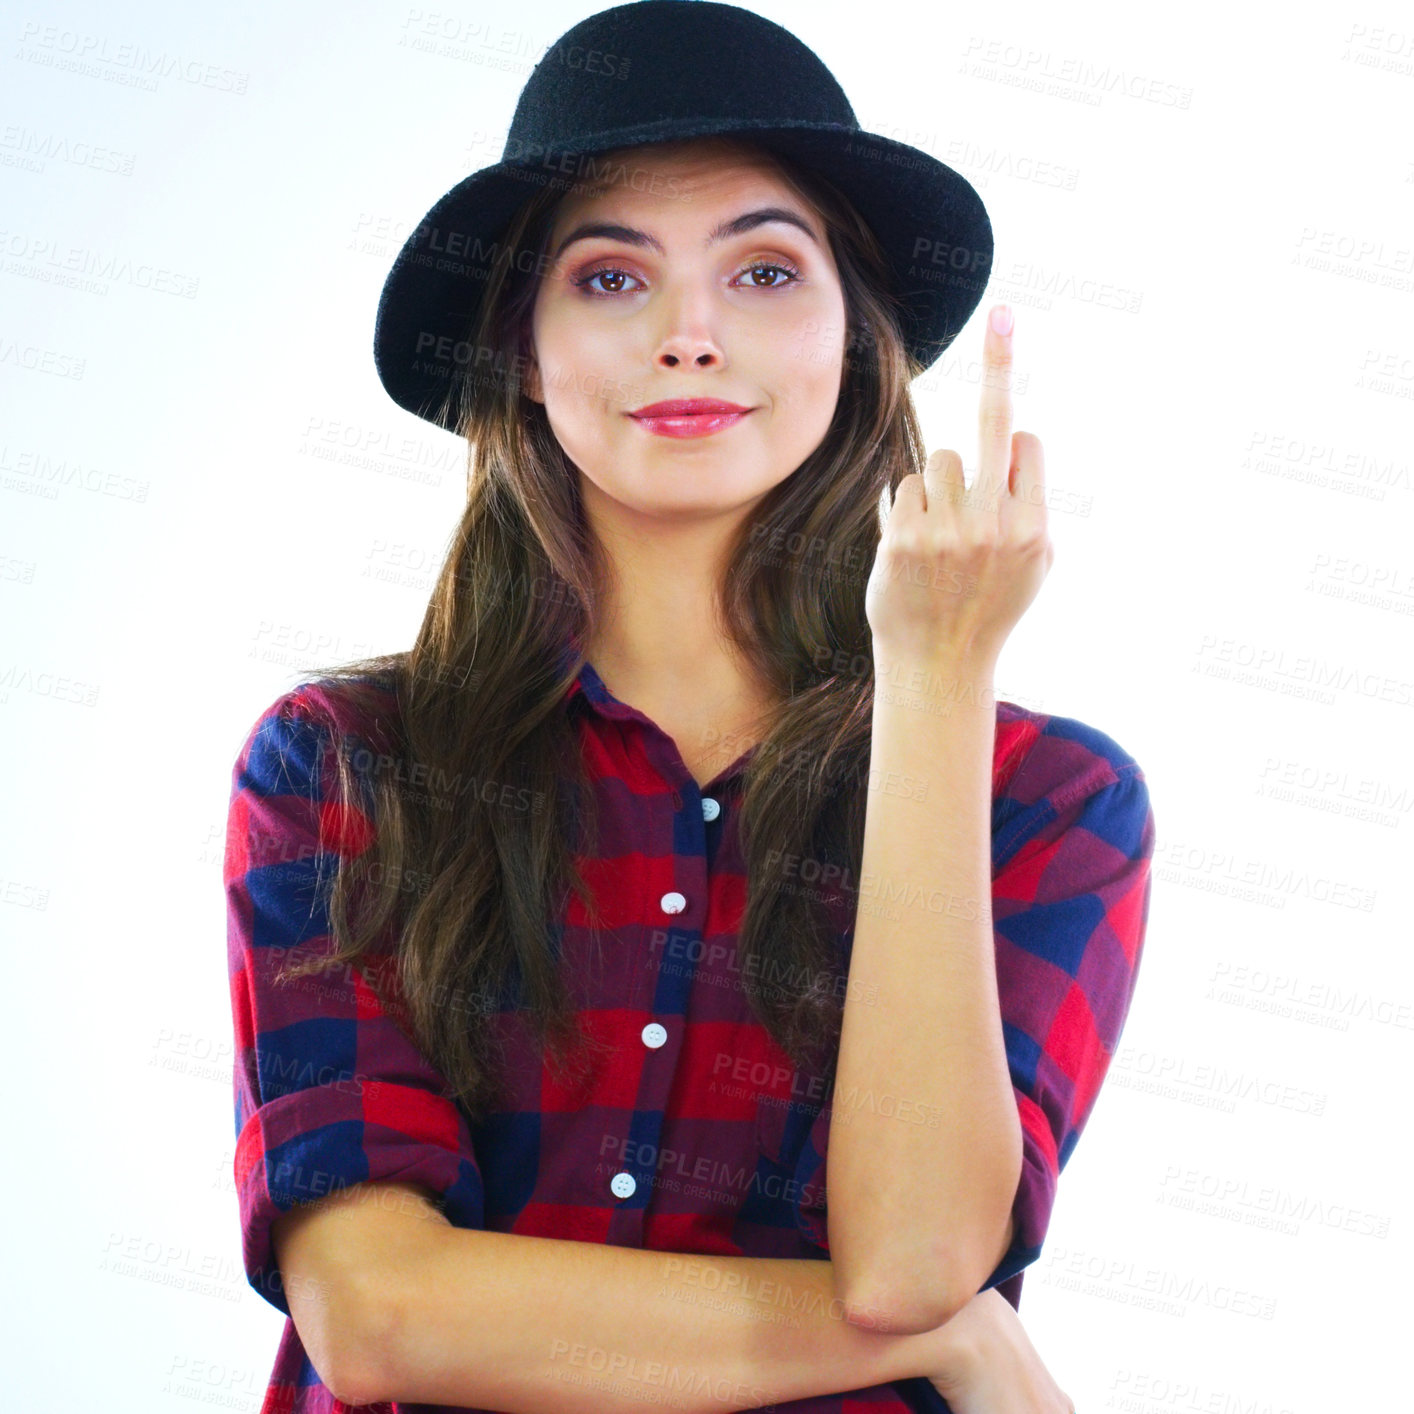 Buy stock photo Cropped shot of a young woman showing middle finger against a white background